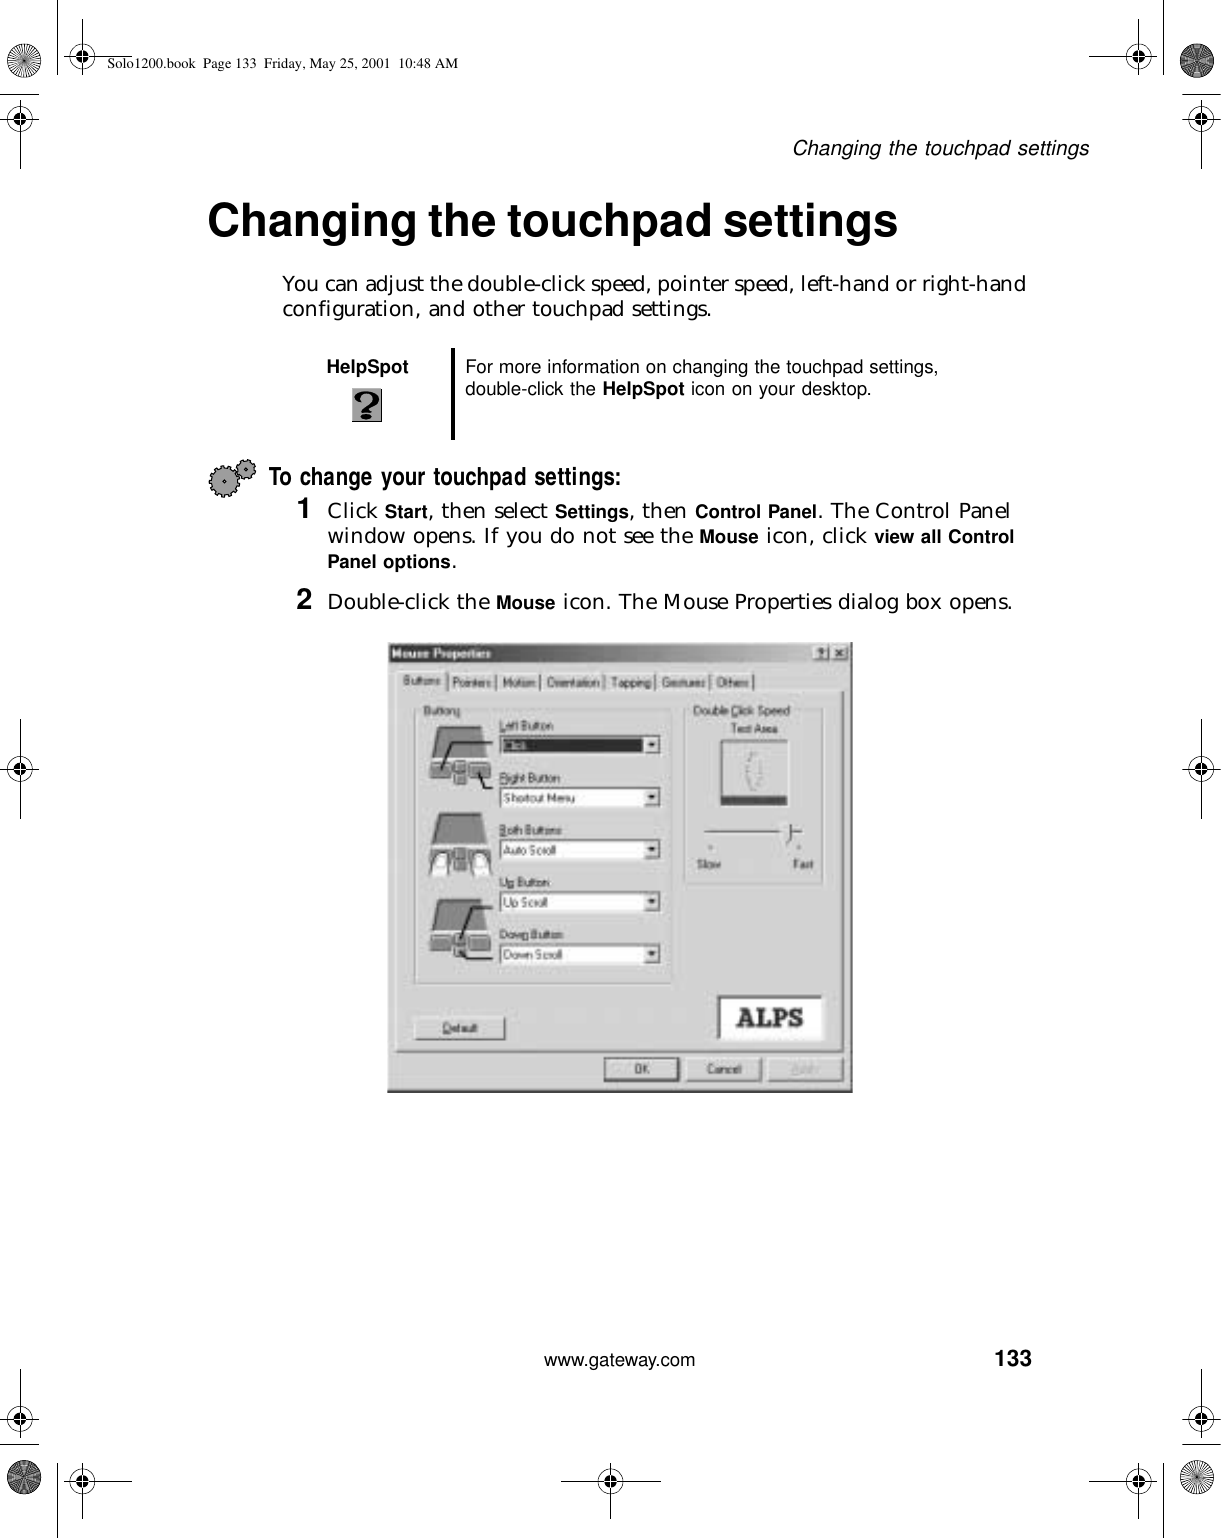 133Changing the touchpad settingswww.gateway.comChanging the touchpad settingsYou can adjust the double-click speed, pointer speed, left-hand or right-hand configuration, and other touchpad settings.To change your touchpad settings:1Click Start, then select Settings, then Control Panel. The Control Panel window opens. If you do not see the Mouse icon, click view all Control Panel options.2Double-click the Mouse icon. The Mouse Properties dialog box opens.HelpSpot For more information on changing the touchpad settings, double-click the HelpSpot icon on your desktop.Solo1200.book Page 133 Friday, May 25, 2001 10:48 AM